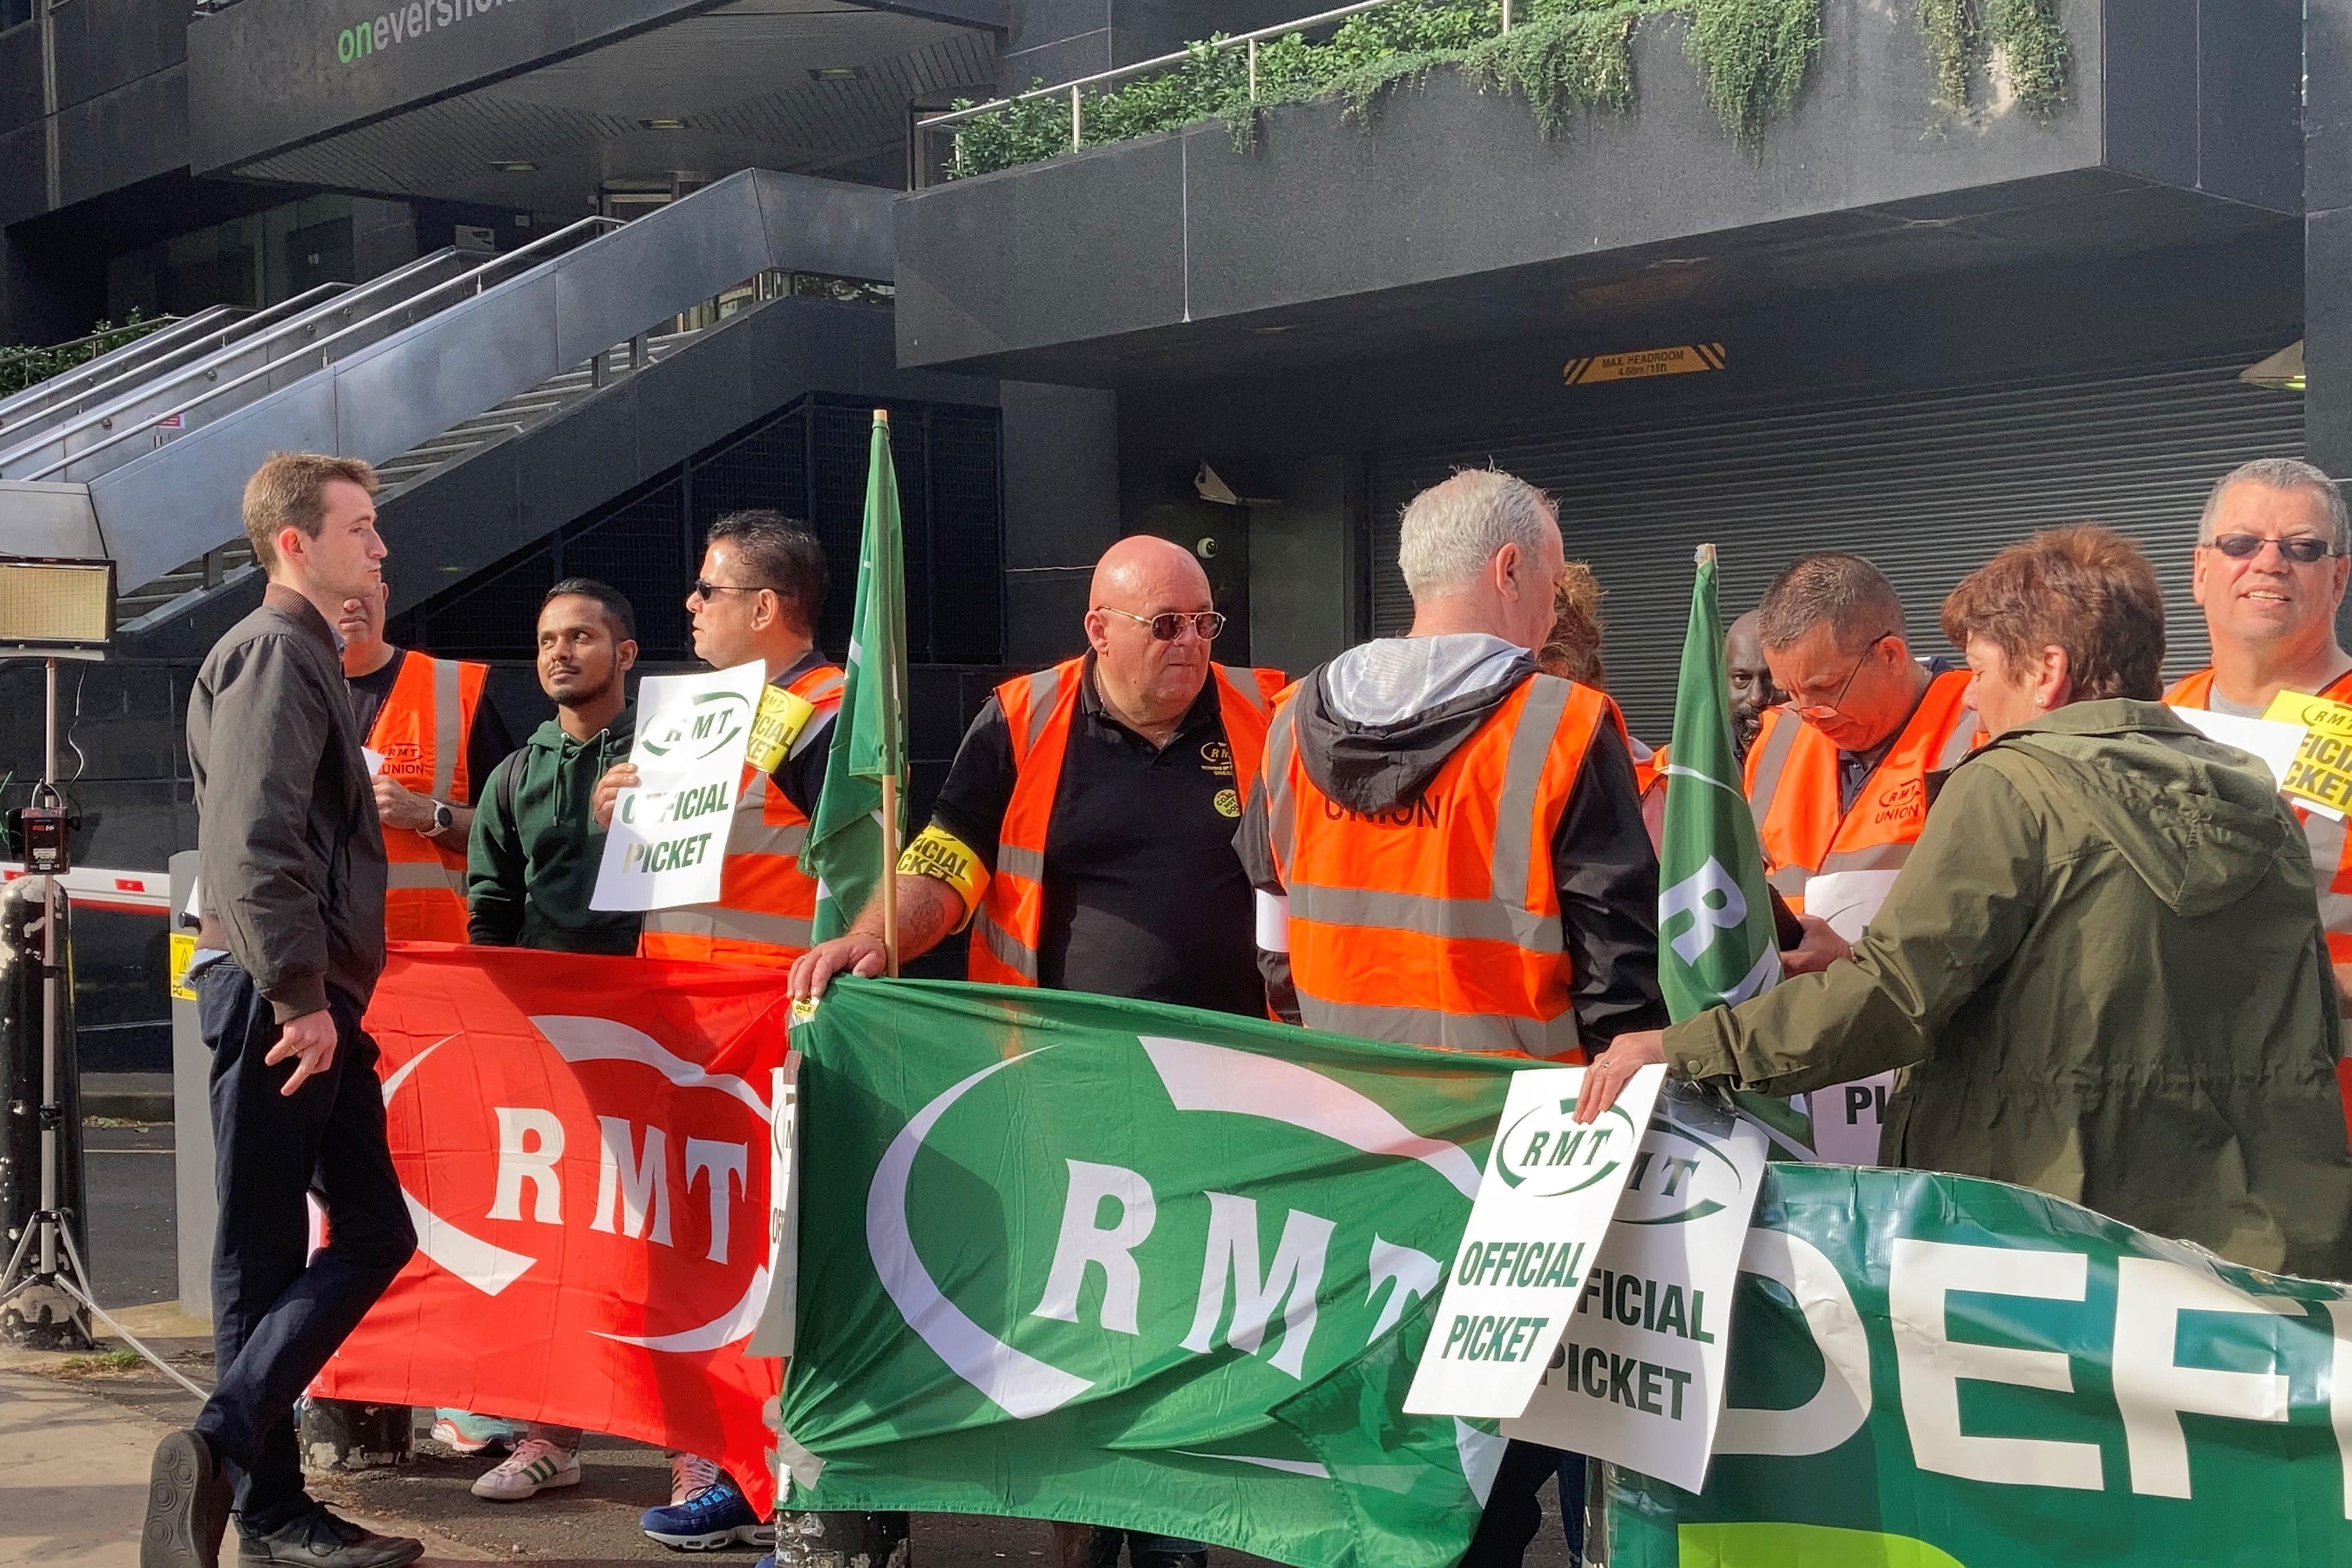 A picket line outside Euston station in London